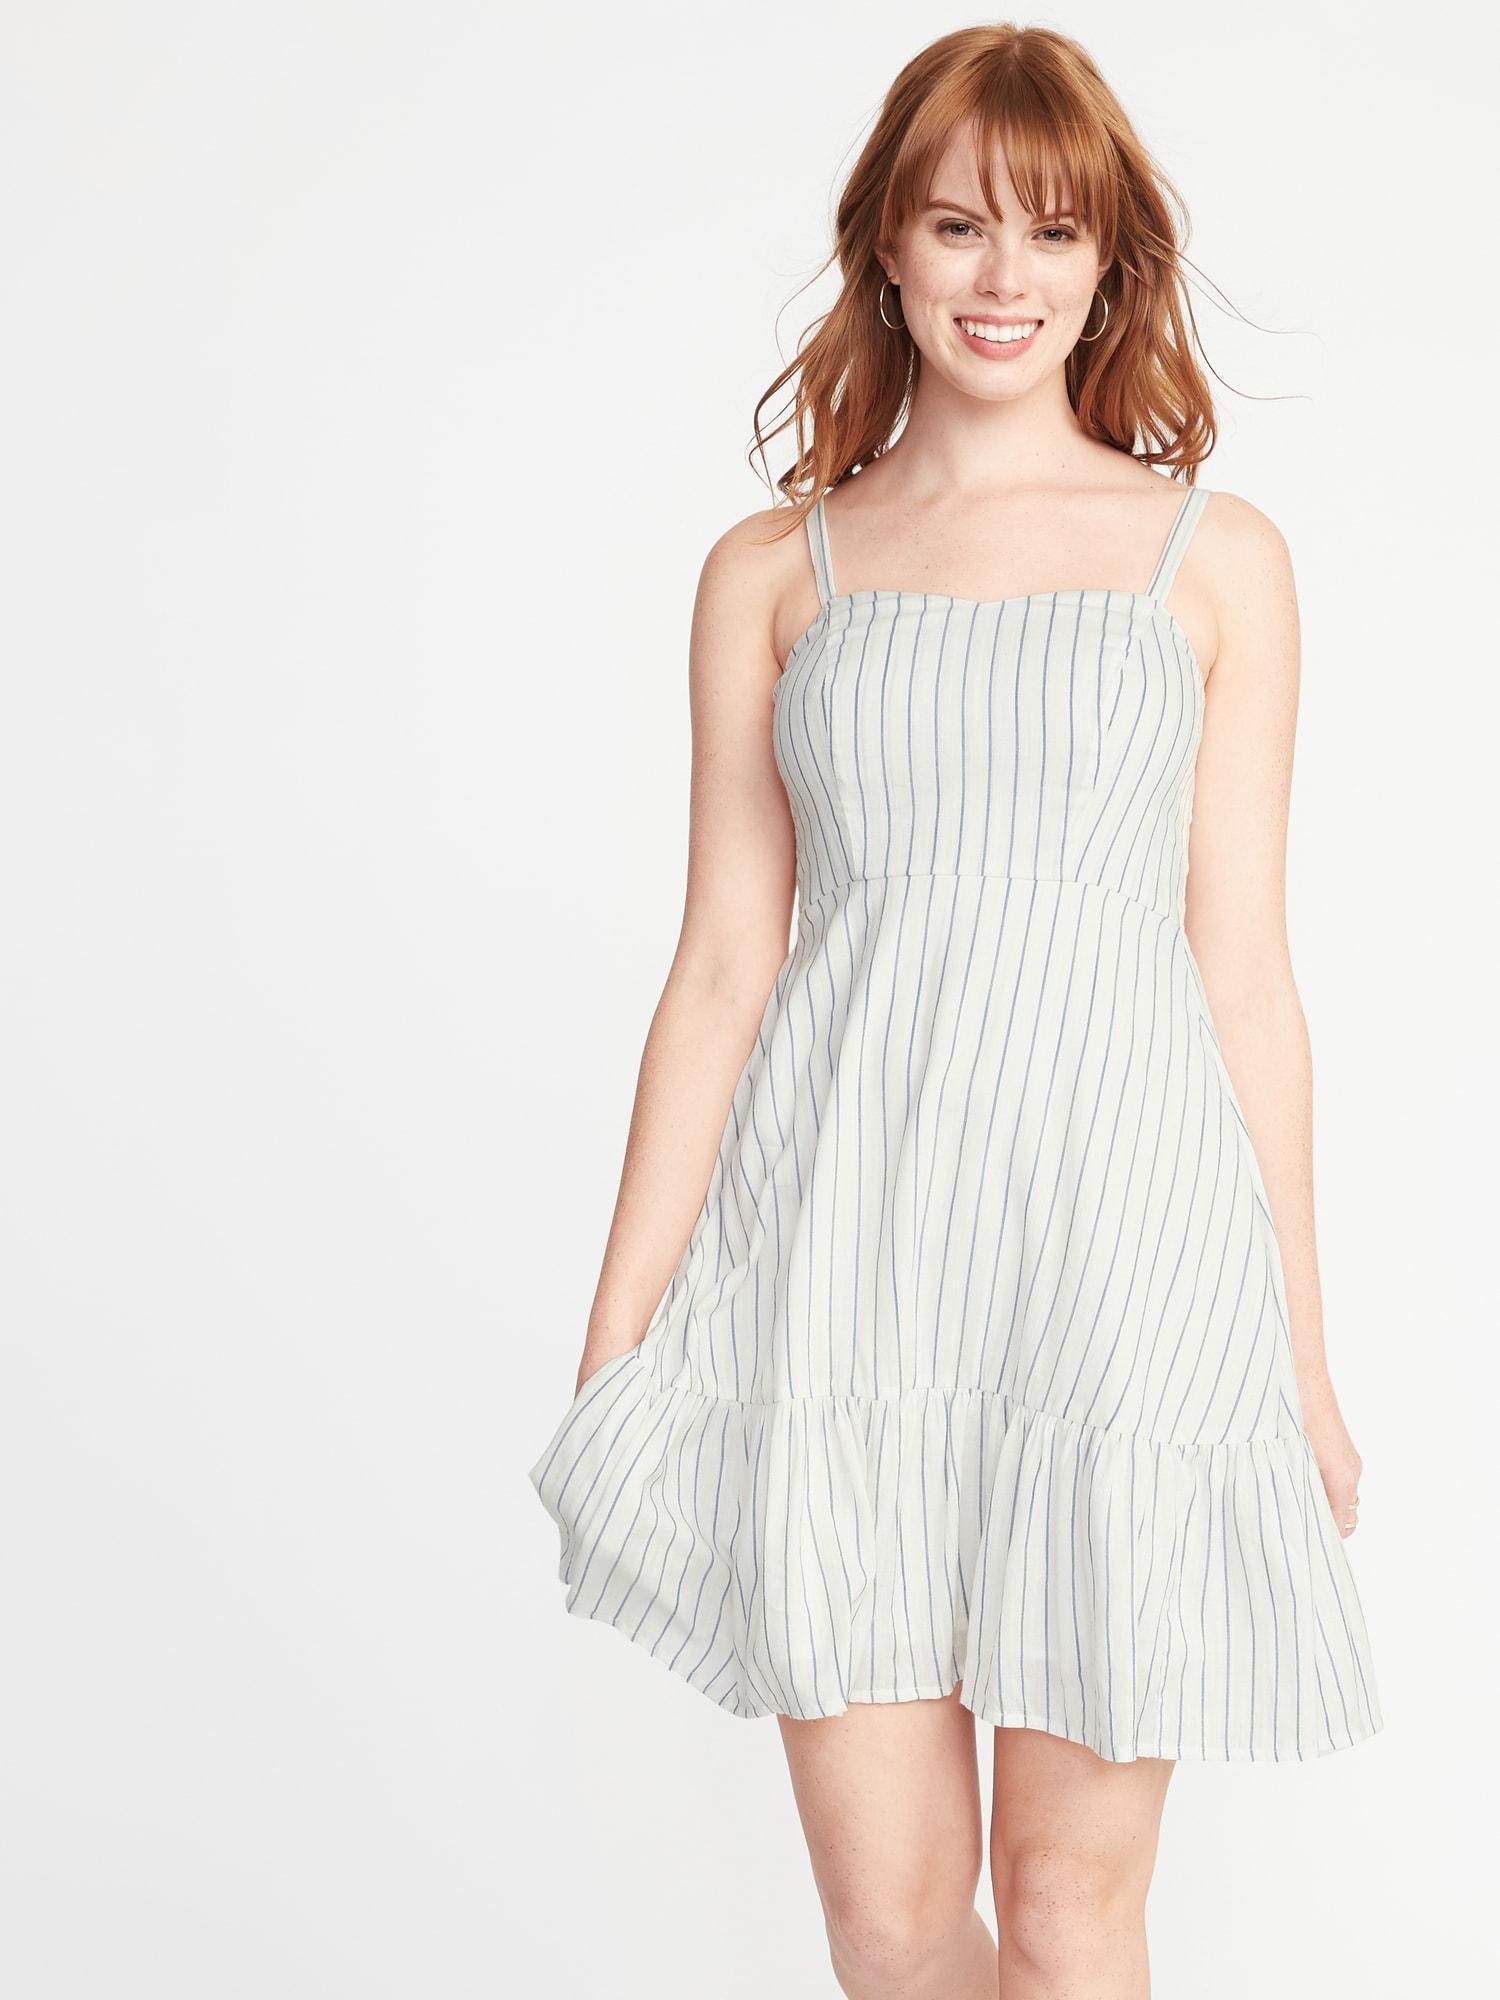 blue and white striped dress old navy